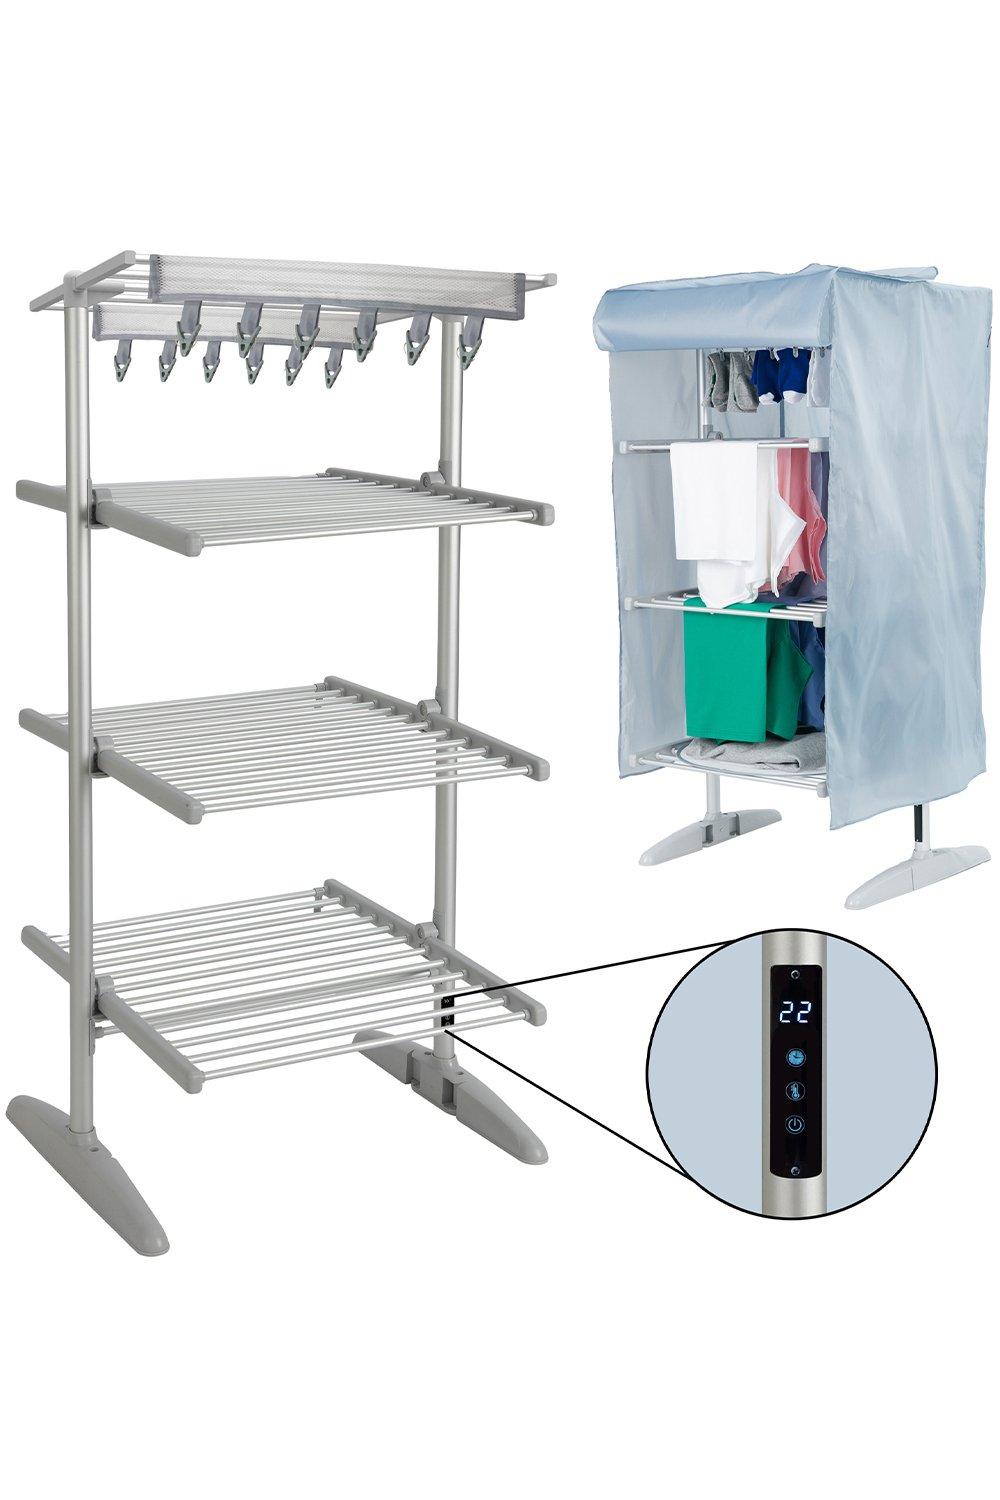 Digital Electric Heated Clothes Airer Dryer Timer 3 Tier Foldable Rack